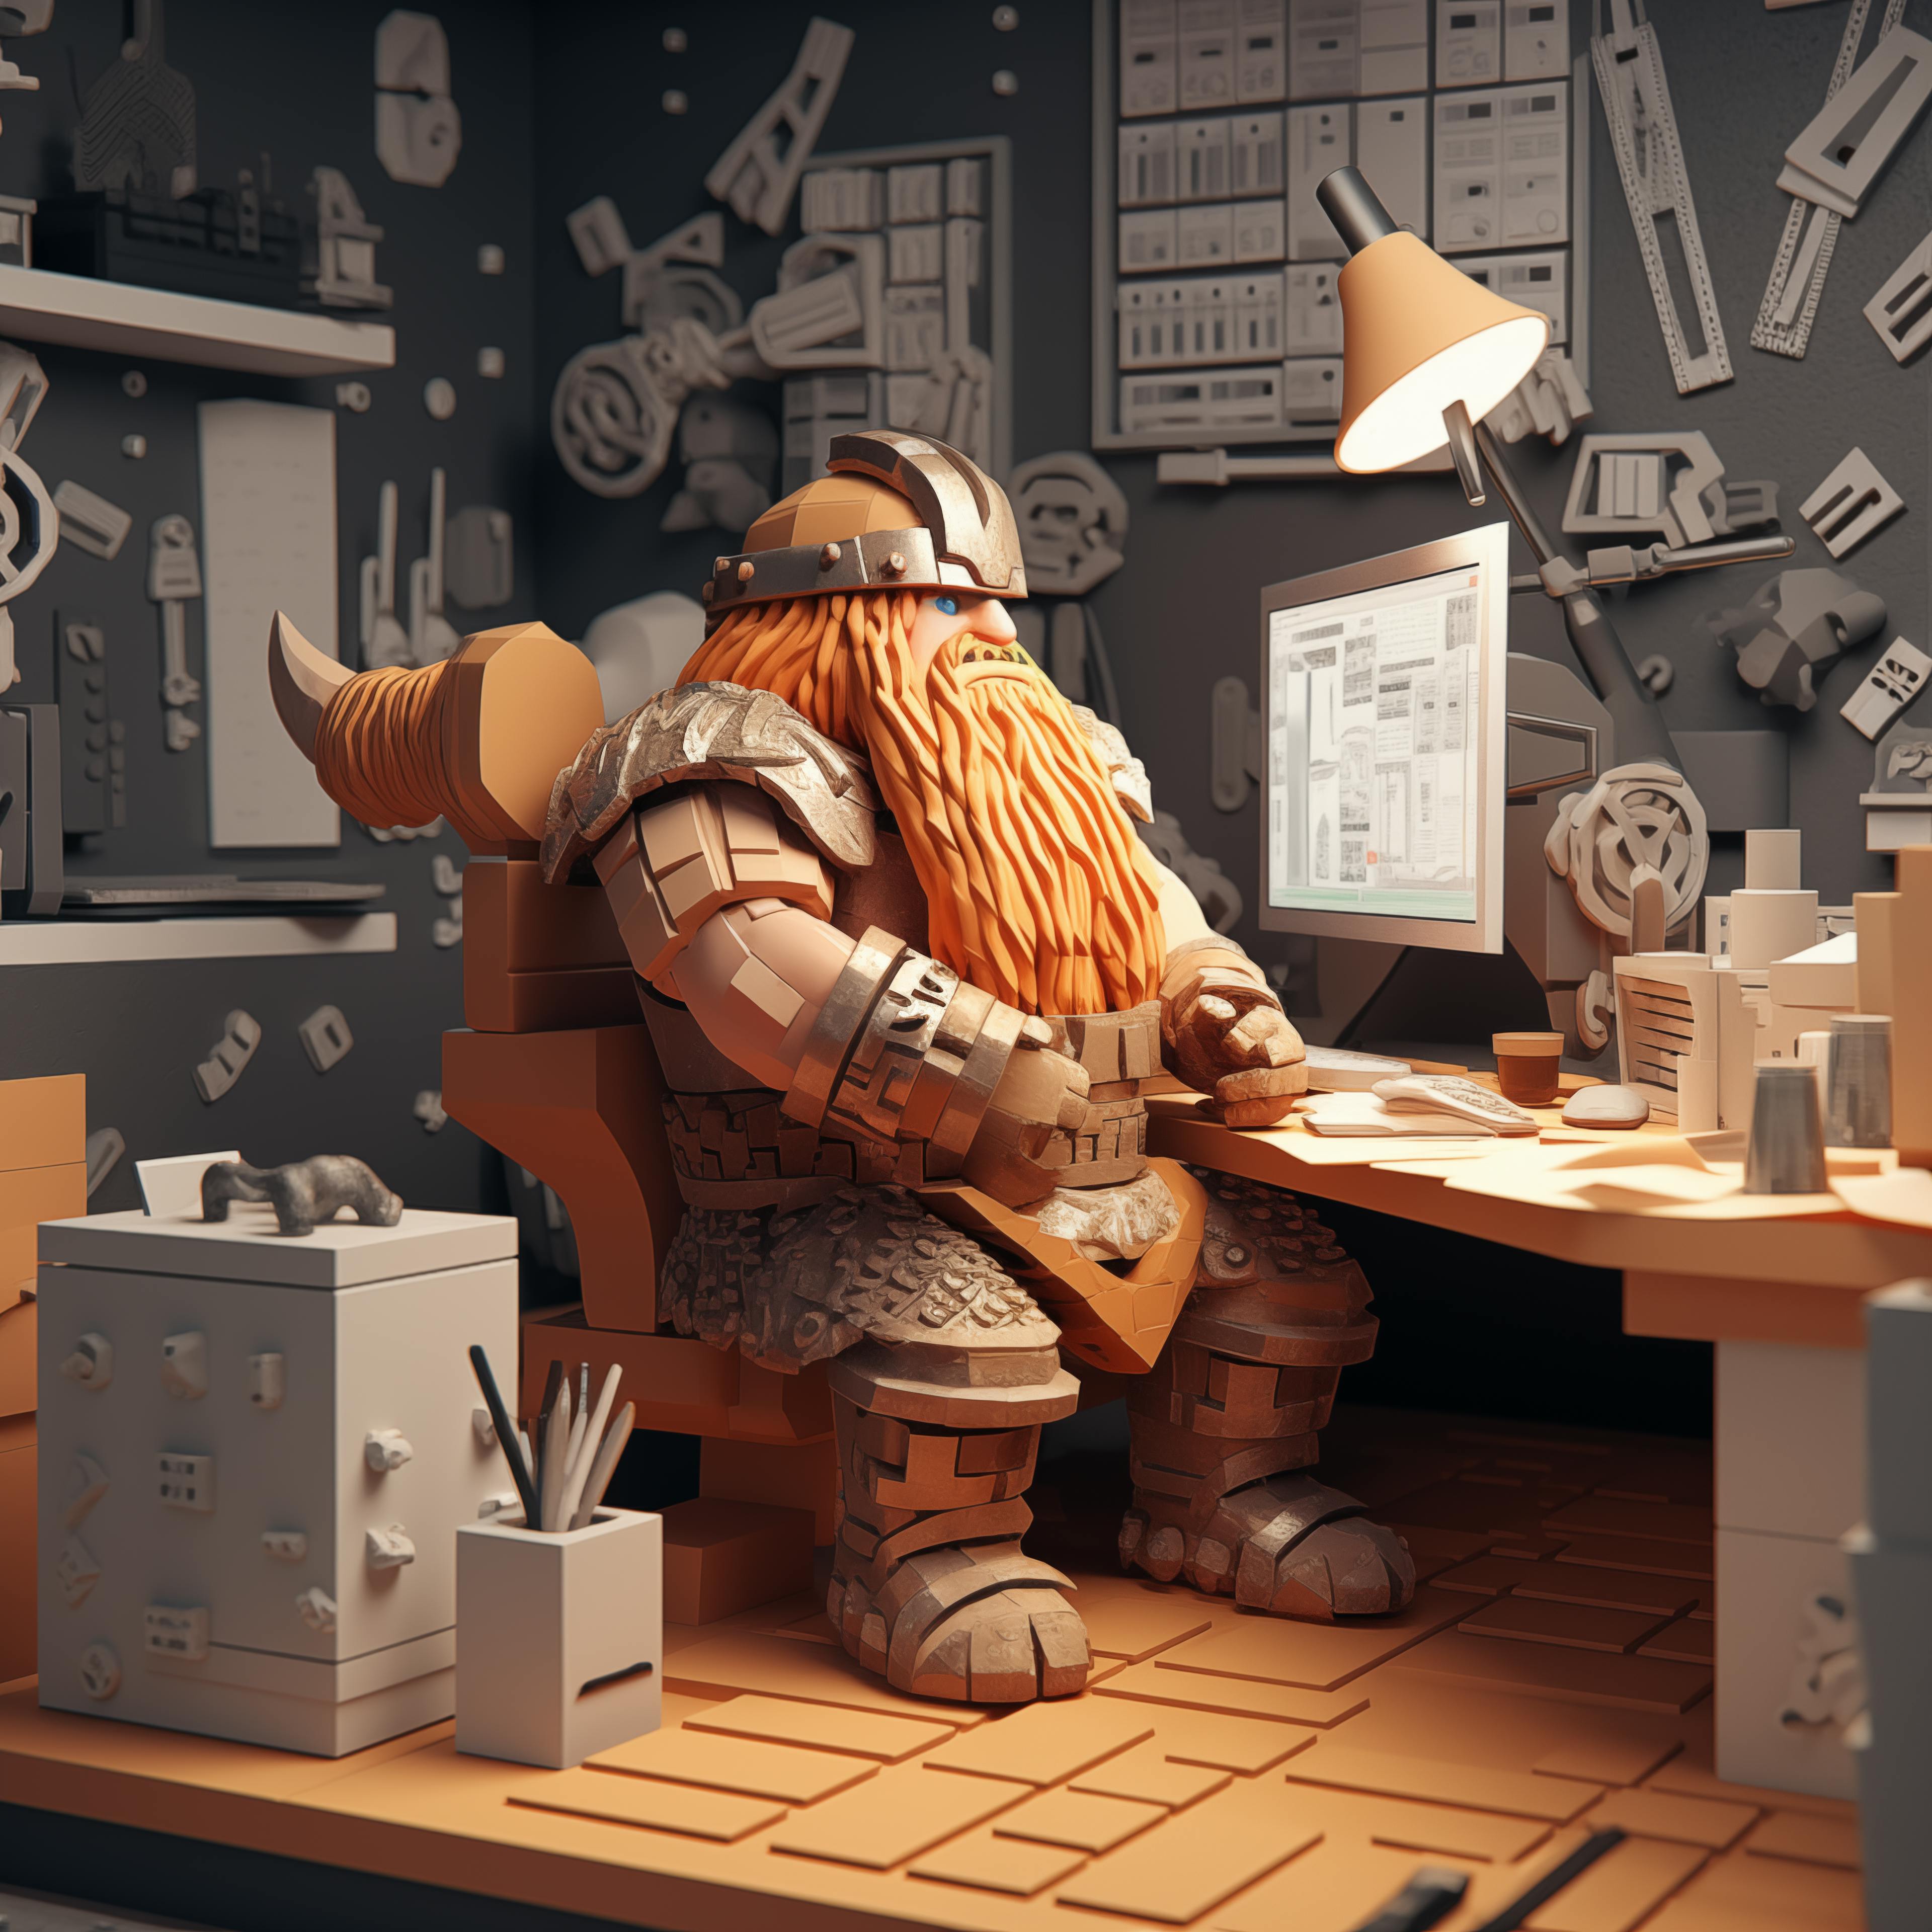 This is an image of a viking in an office